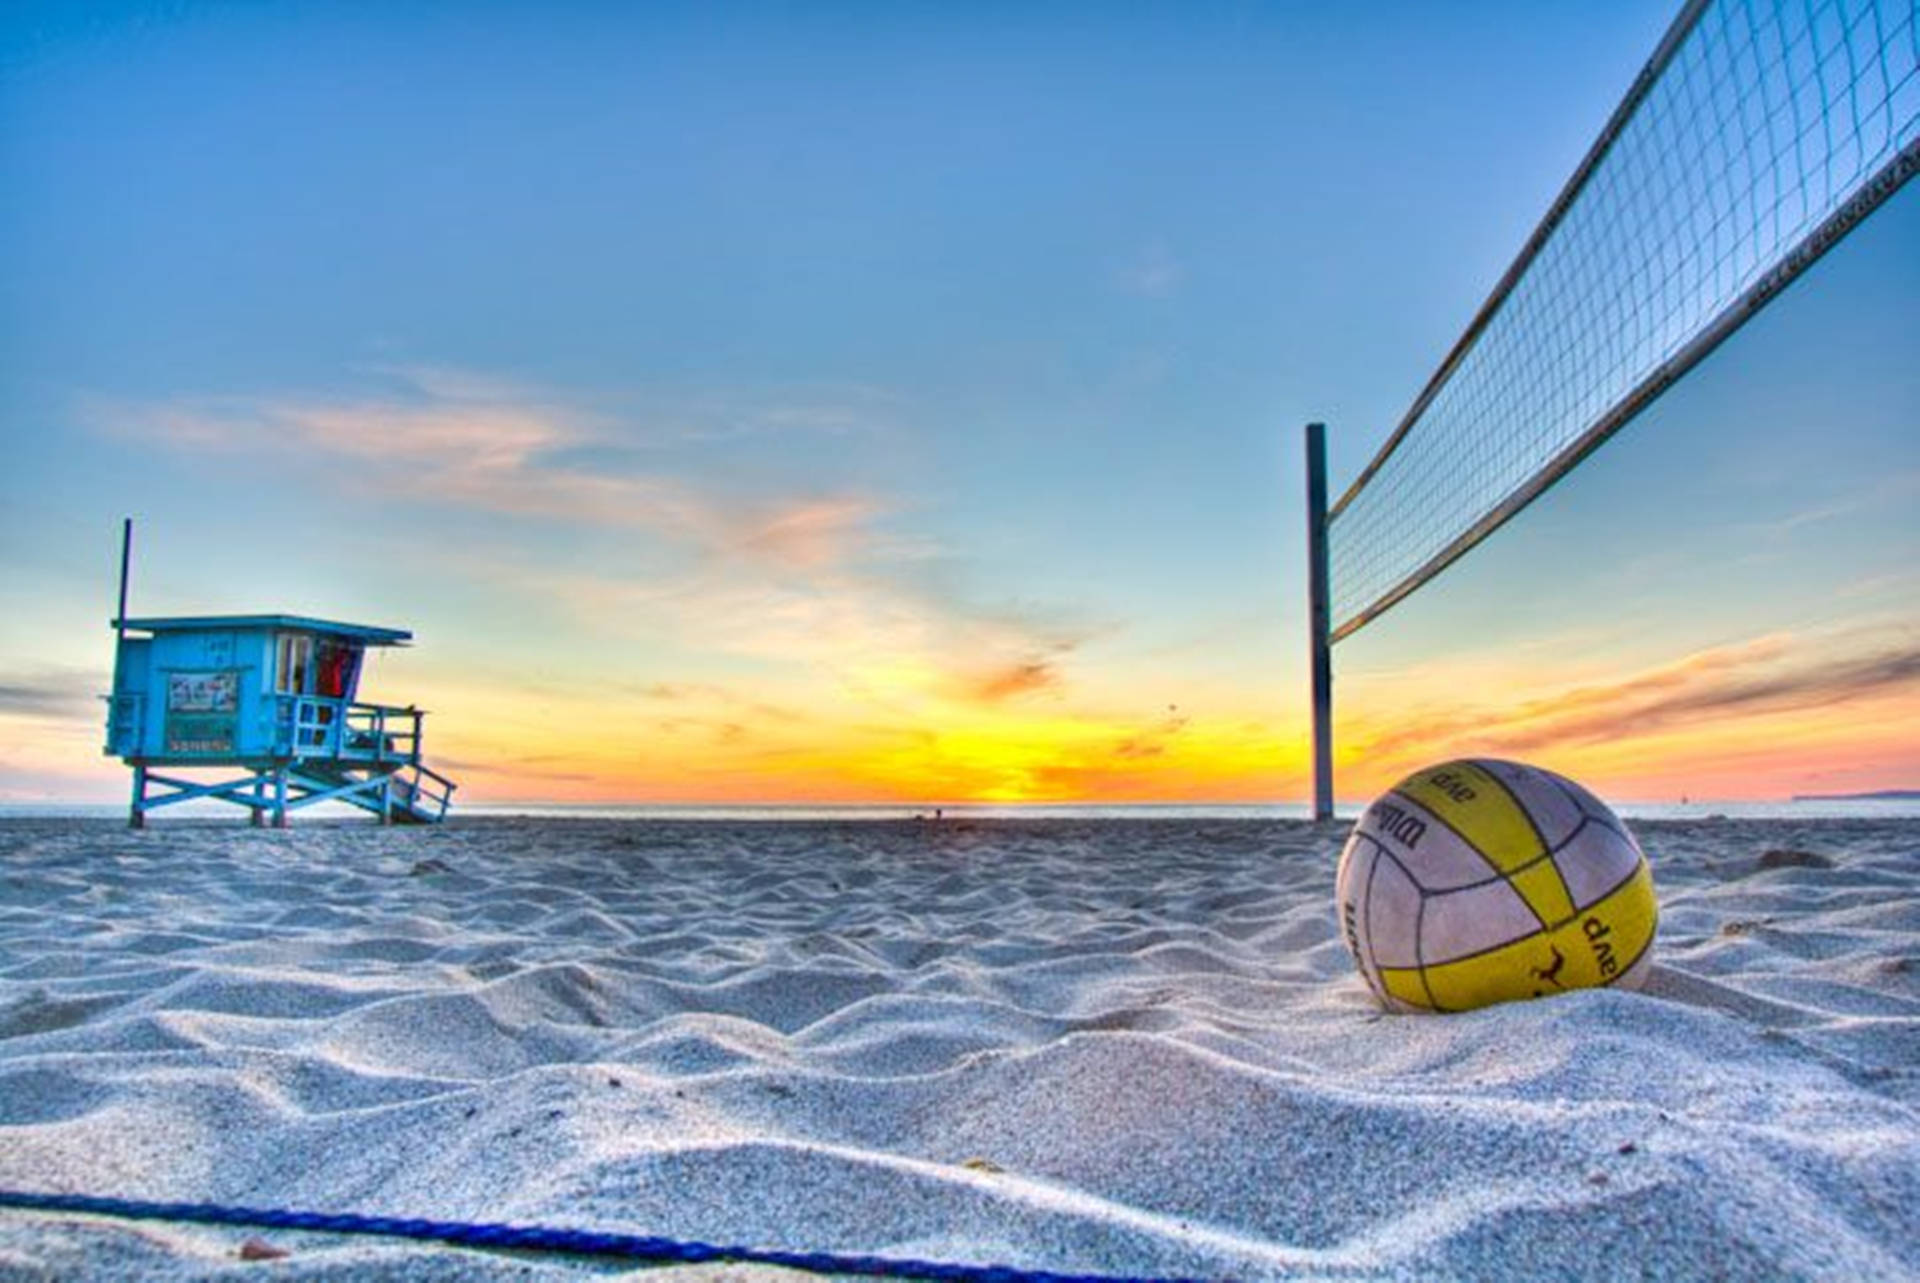 Aesthetic Beach Volleyball And Lifeguard Post Wallpaper